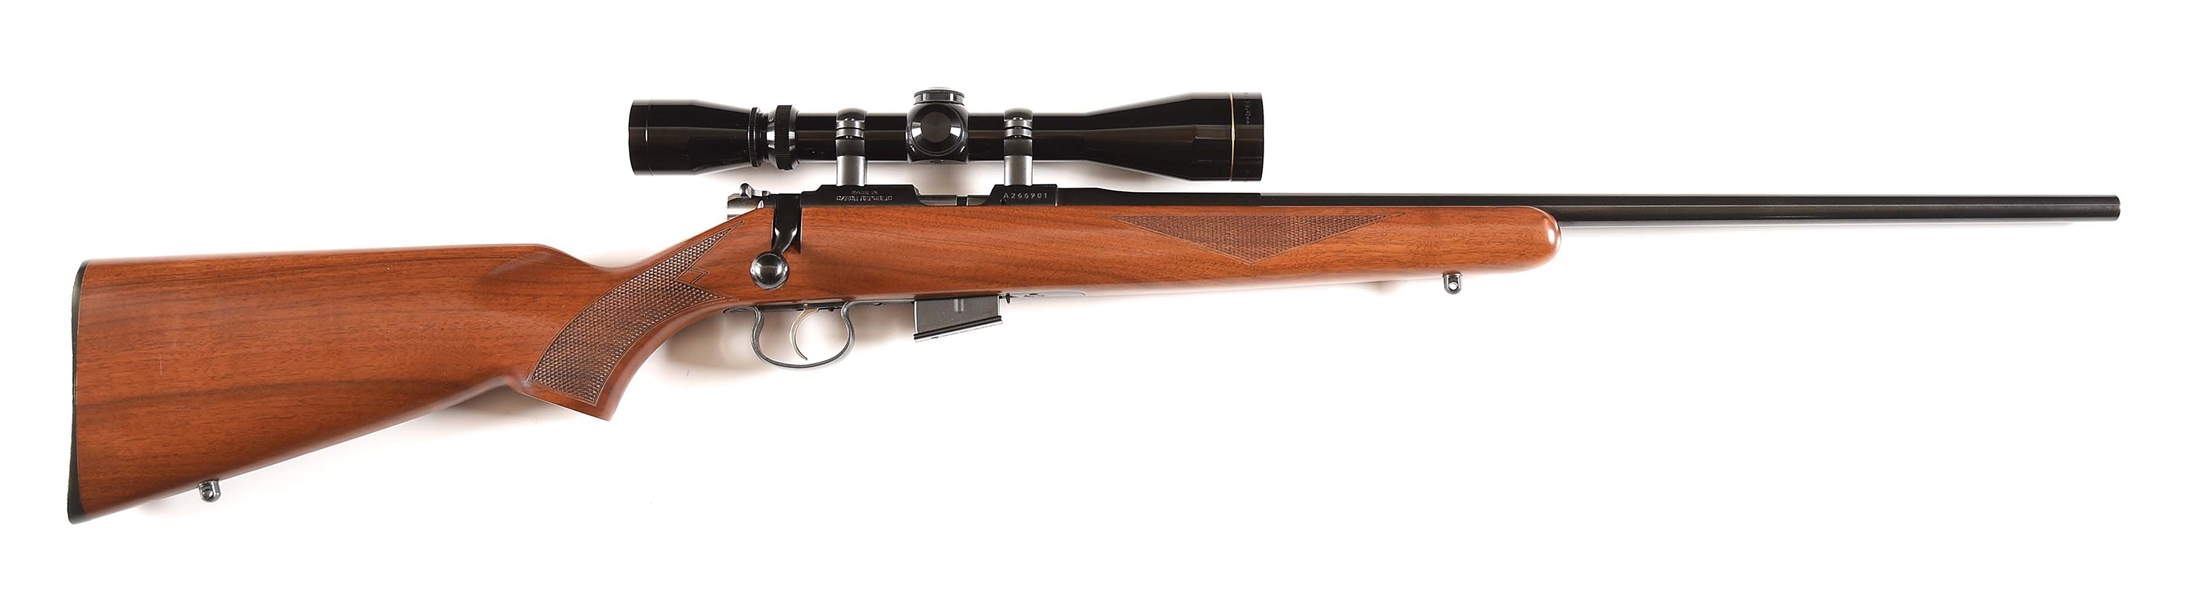 (M) CZ 453 AMERICAN .17 HMR BOLT ACTION RIFLE WITH SCOPE